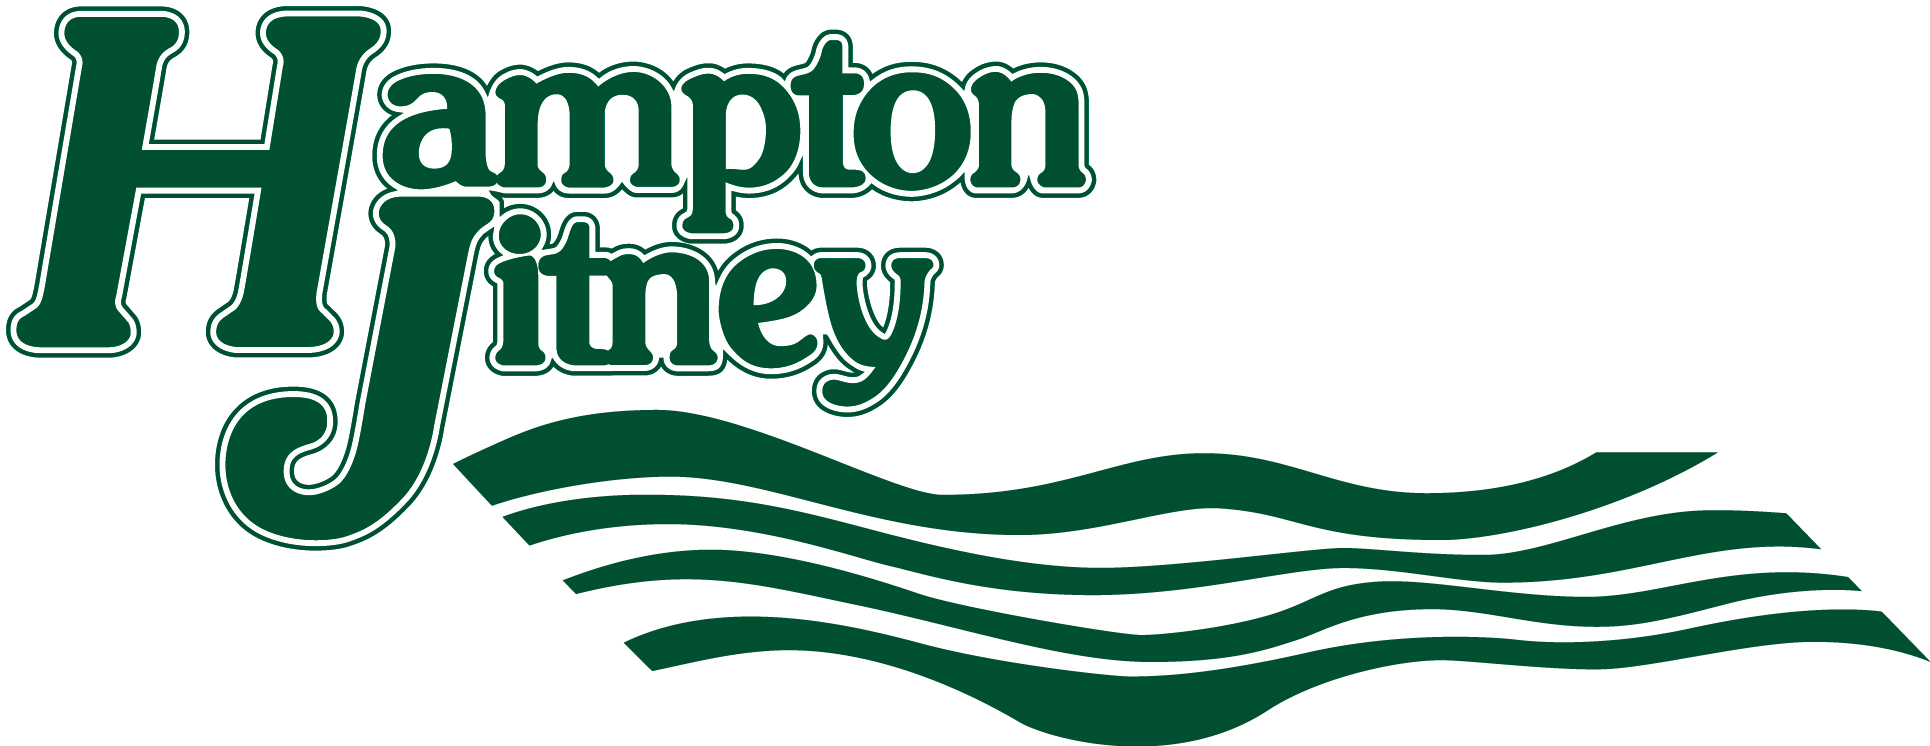 Hampton Jitney, transportation in New York City, Eastern Long Island (North and South Forks)